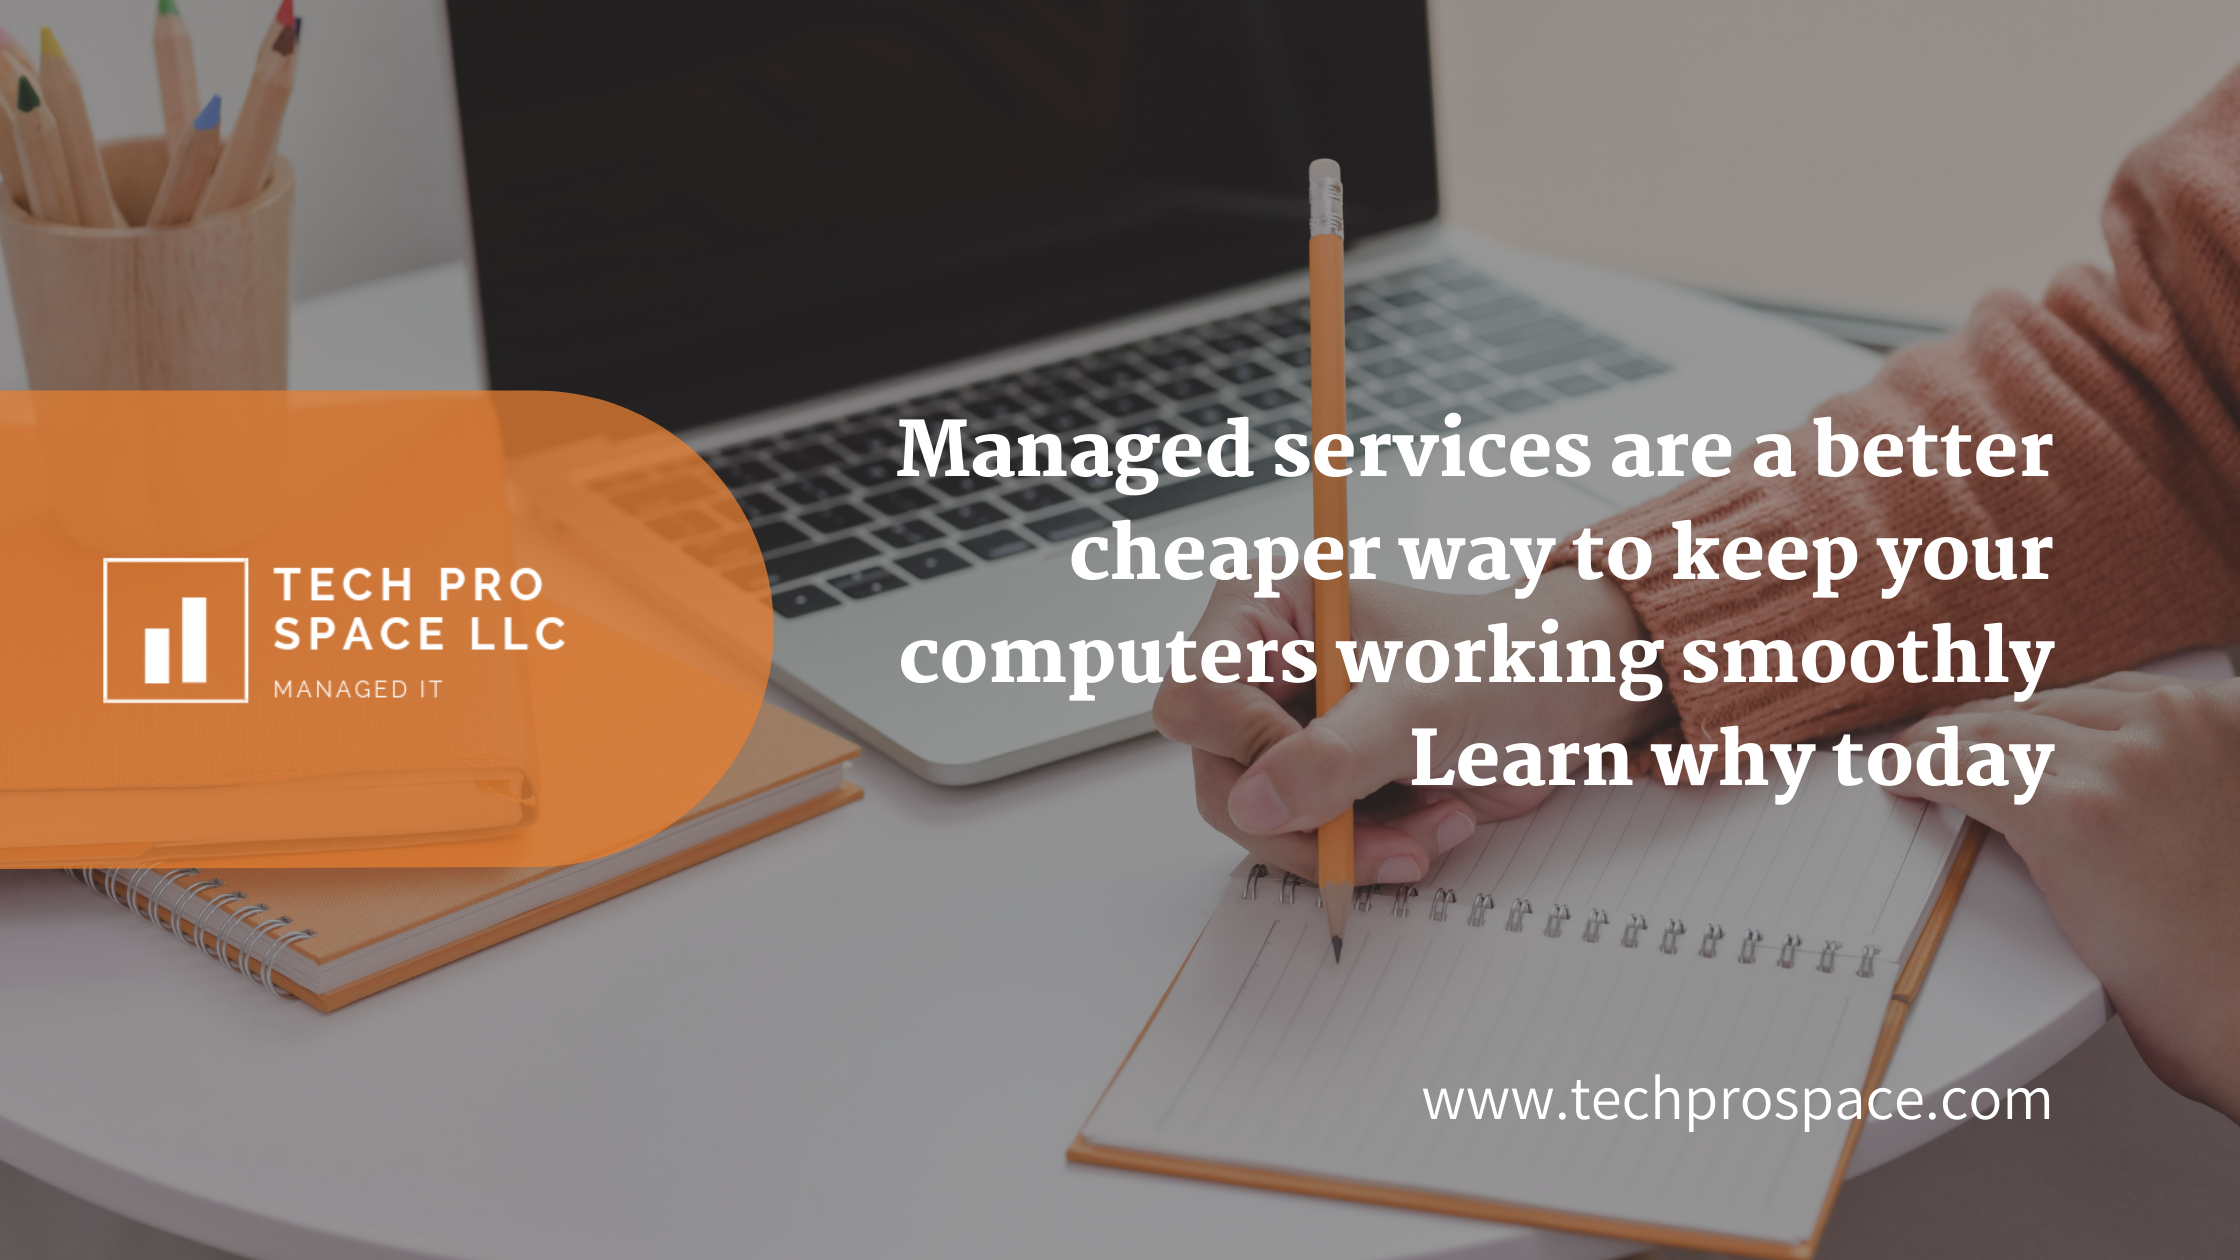 Managed services are a better and cheaper way to keep your computers working smoothly